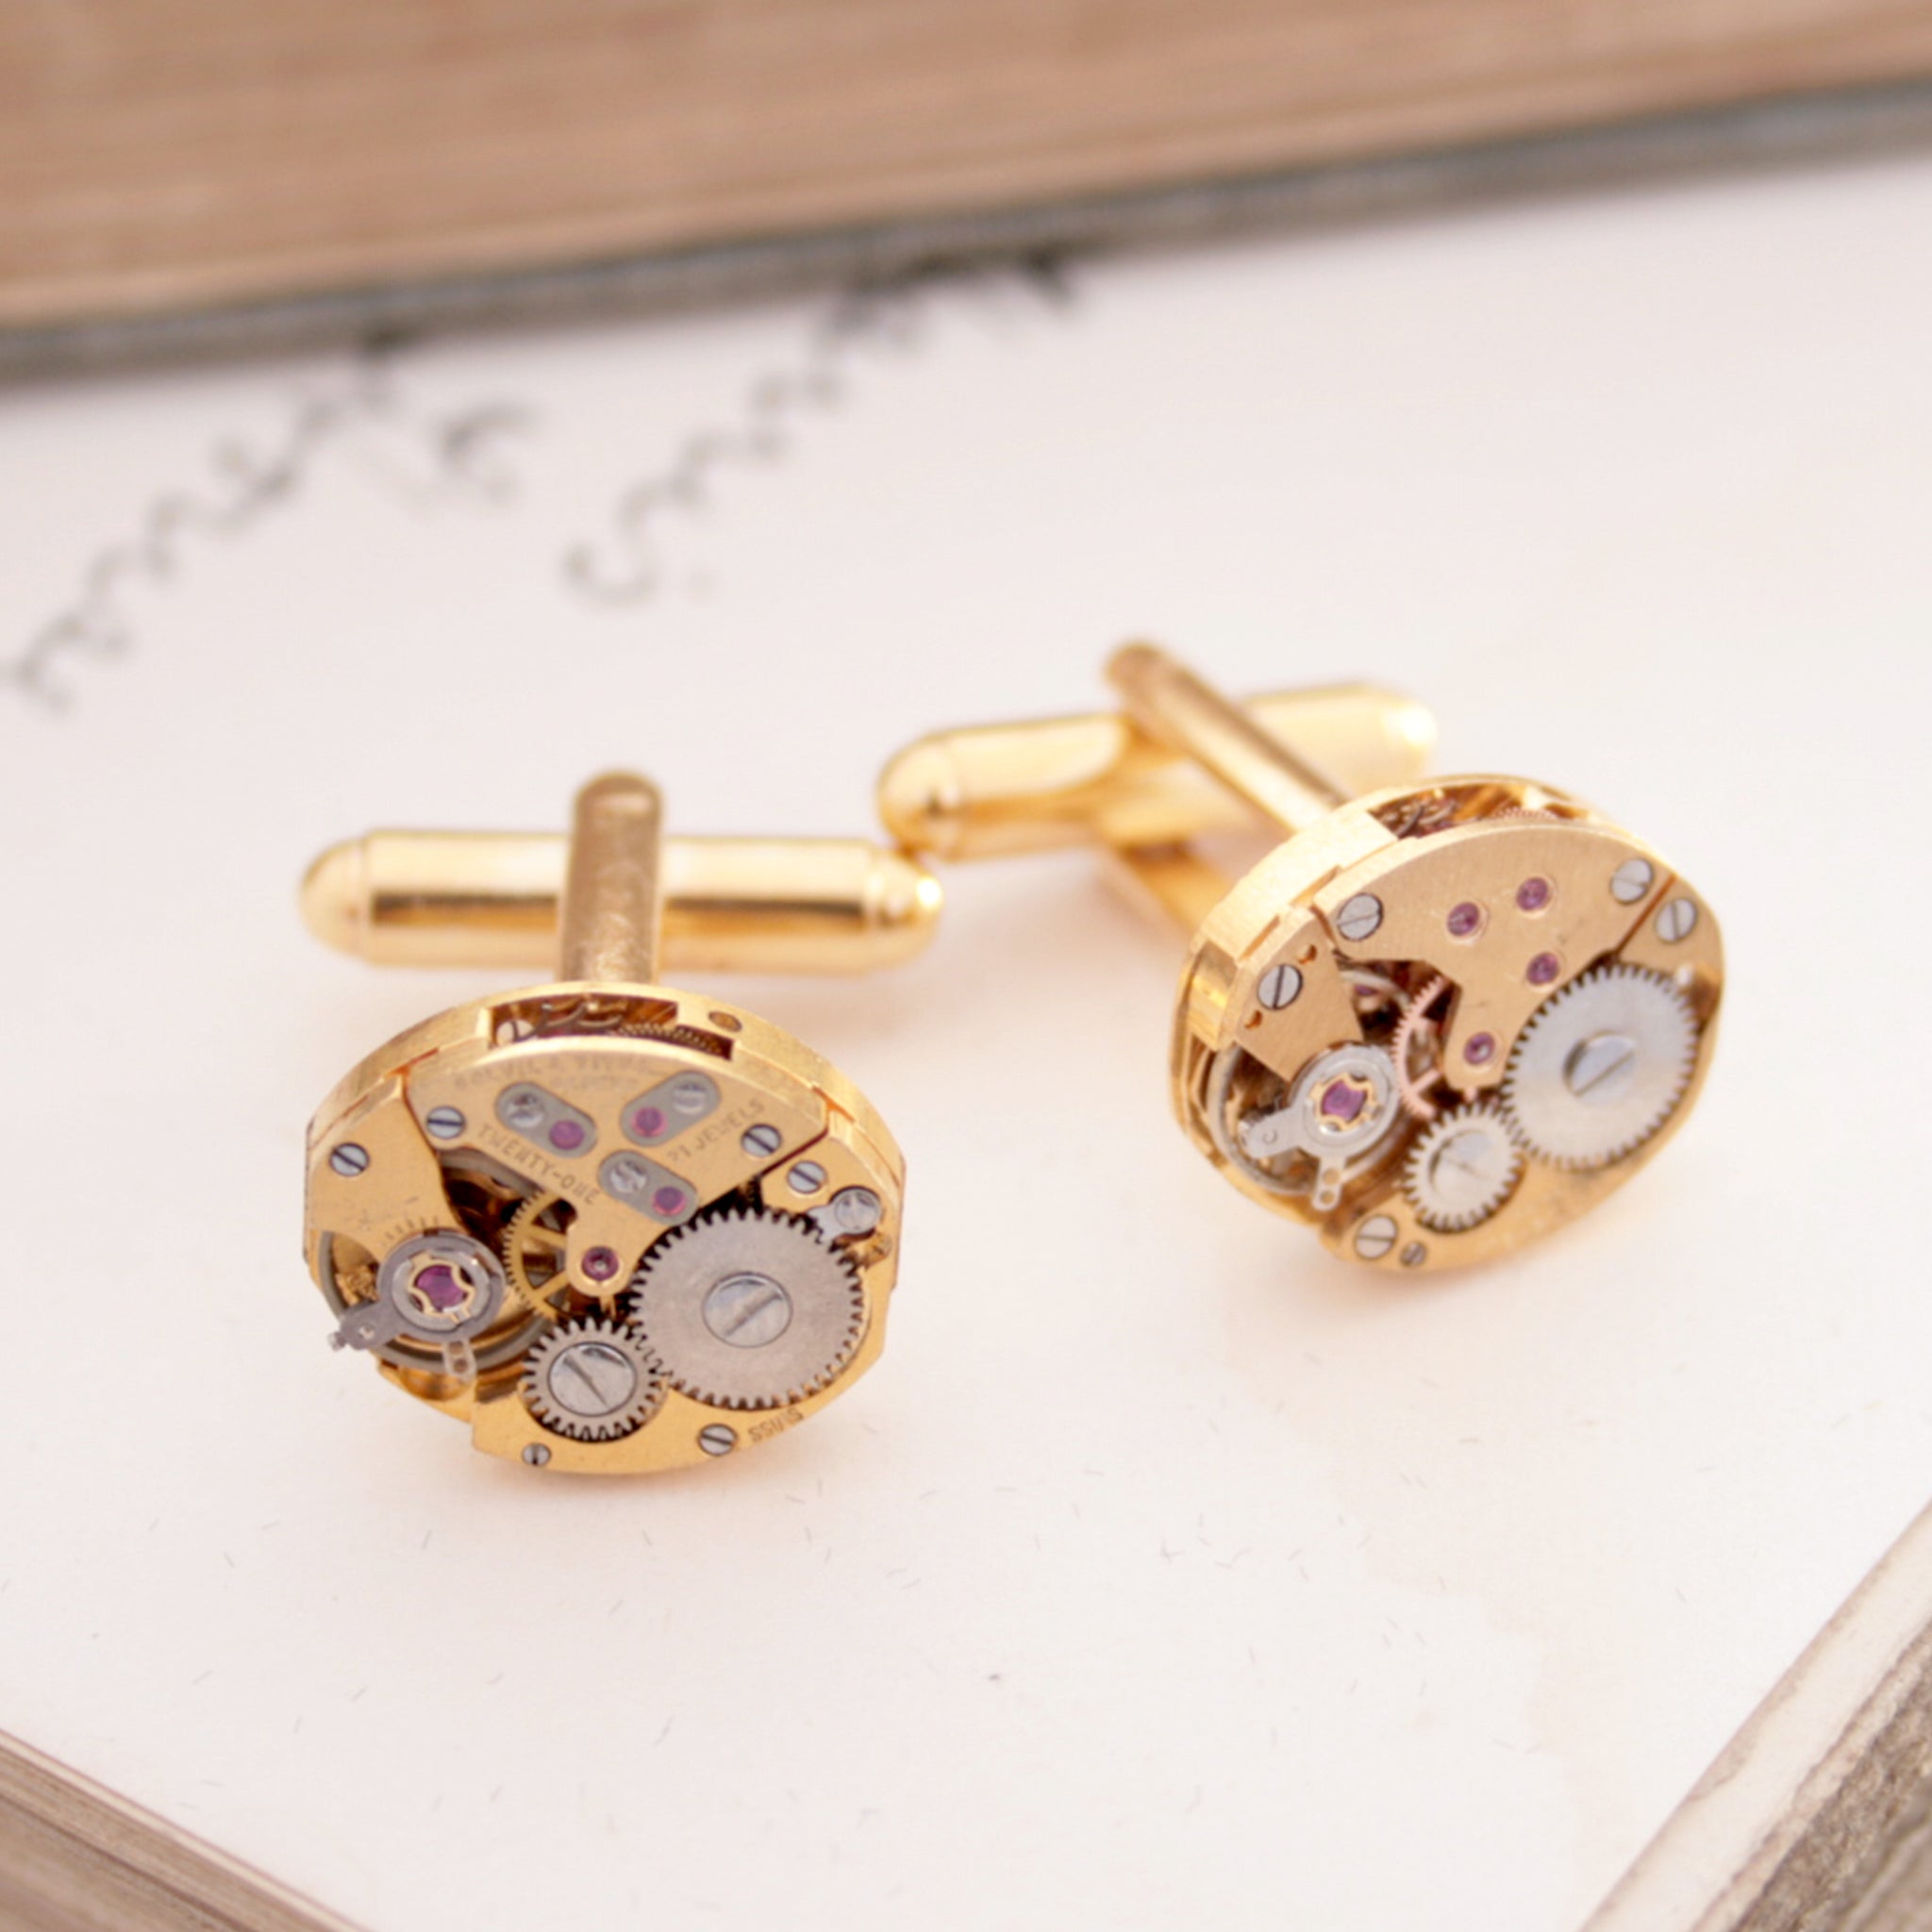 Gold Watch Cufflinks made of Rotary watch movements